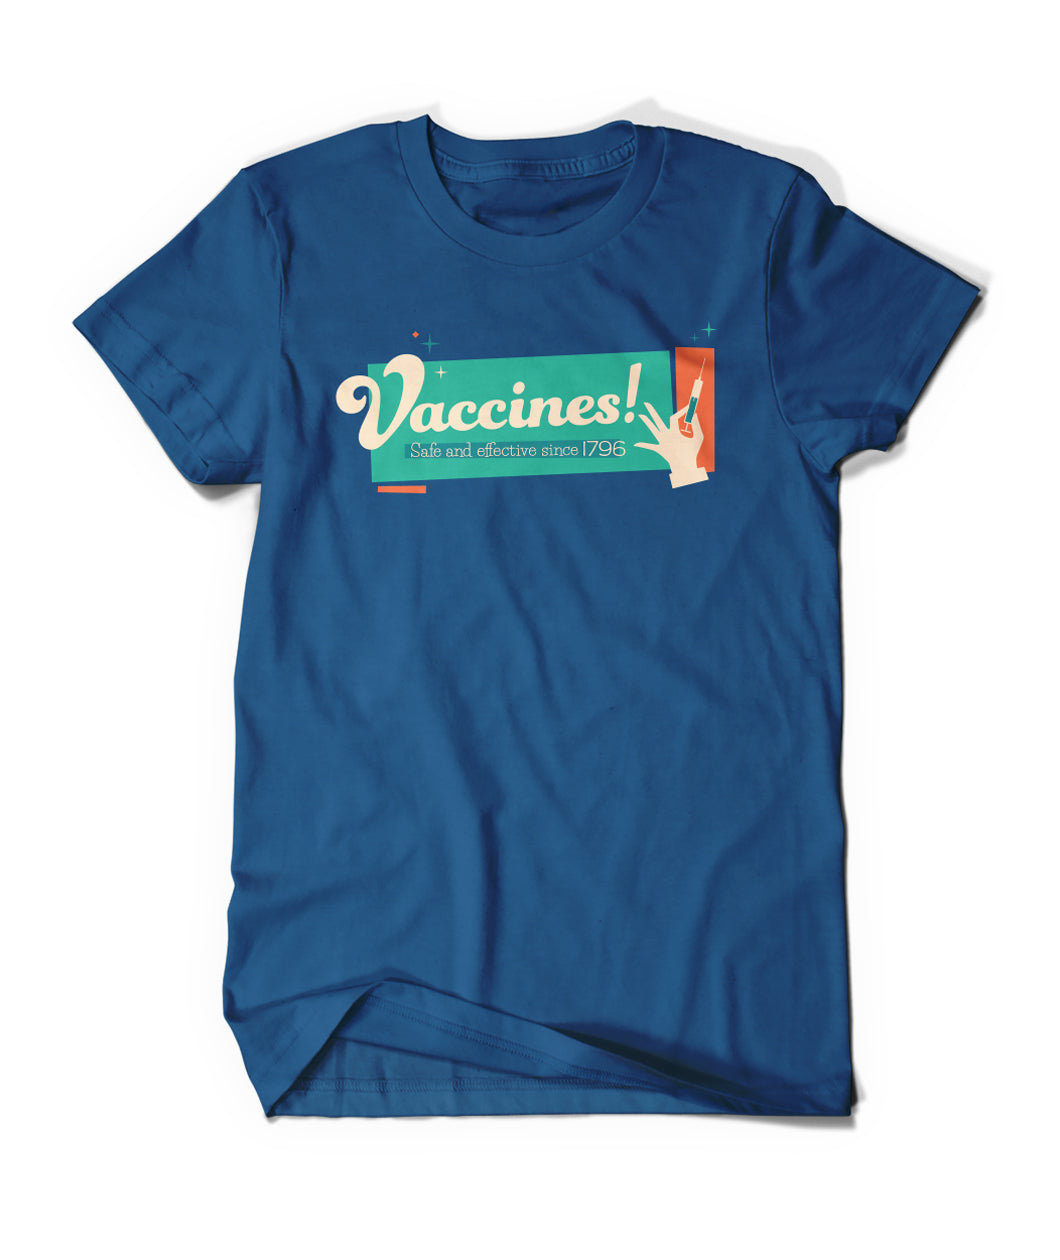 A dark blue tee-shirt that says "Vaccines!" in cream lettering. Below that it says, "Safe and effective since 1796". There is a hand holding a small syringe to the right. Behind the words and hand is a large teal rectangle with an orange one next to it. 